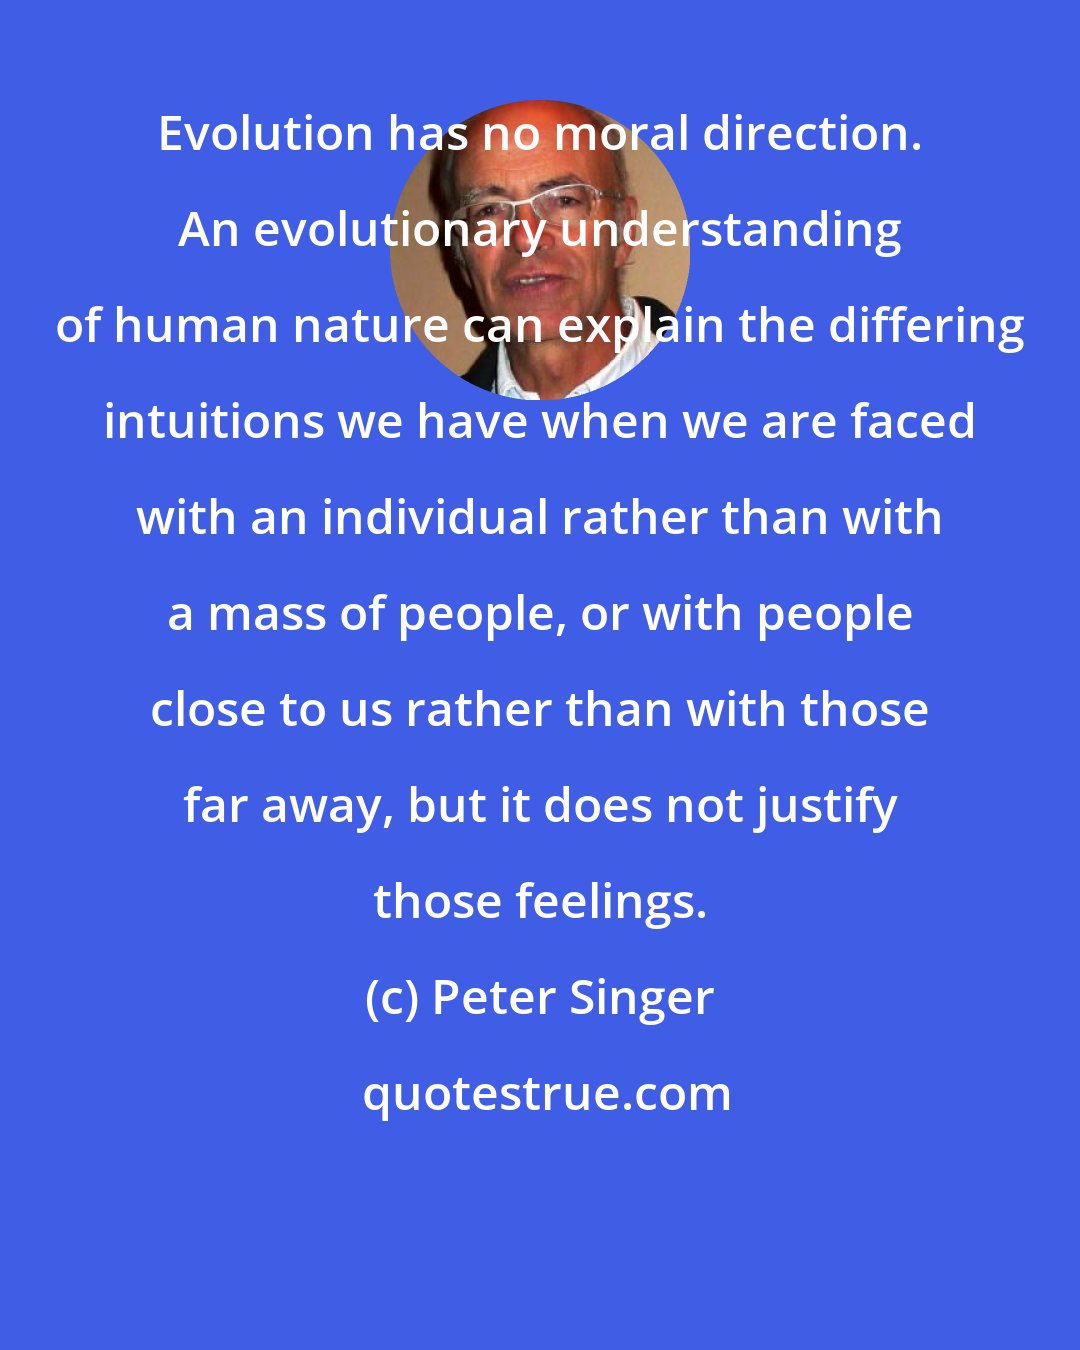 Peter Singer: Evolution has no moral direction. An evolutionary understanding of human nature can explain the differing intuitions we have when we are faced with an individual rather than with a mass of people, or with people close to us rather than with those far away, but it does not justify those feelings.